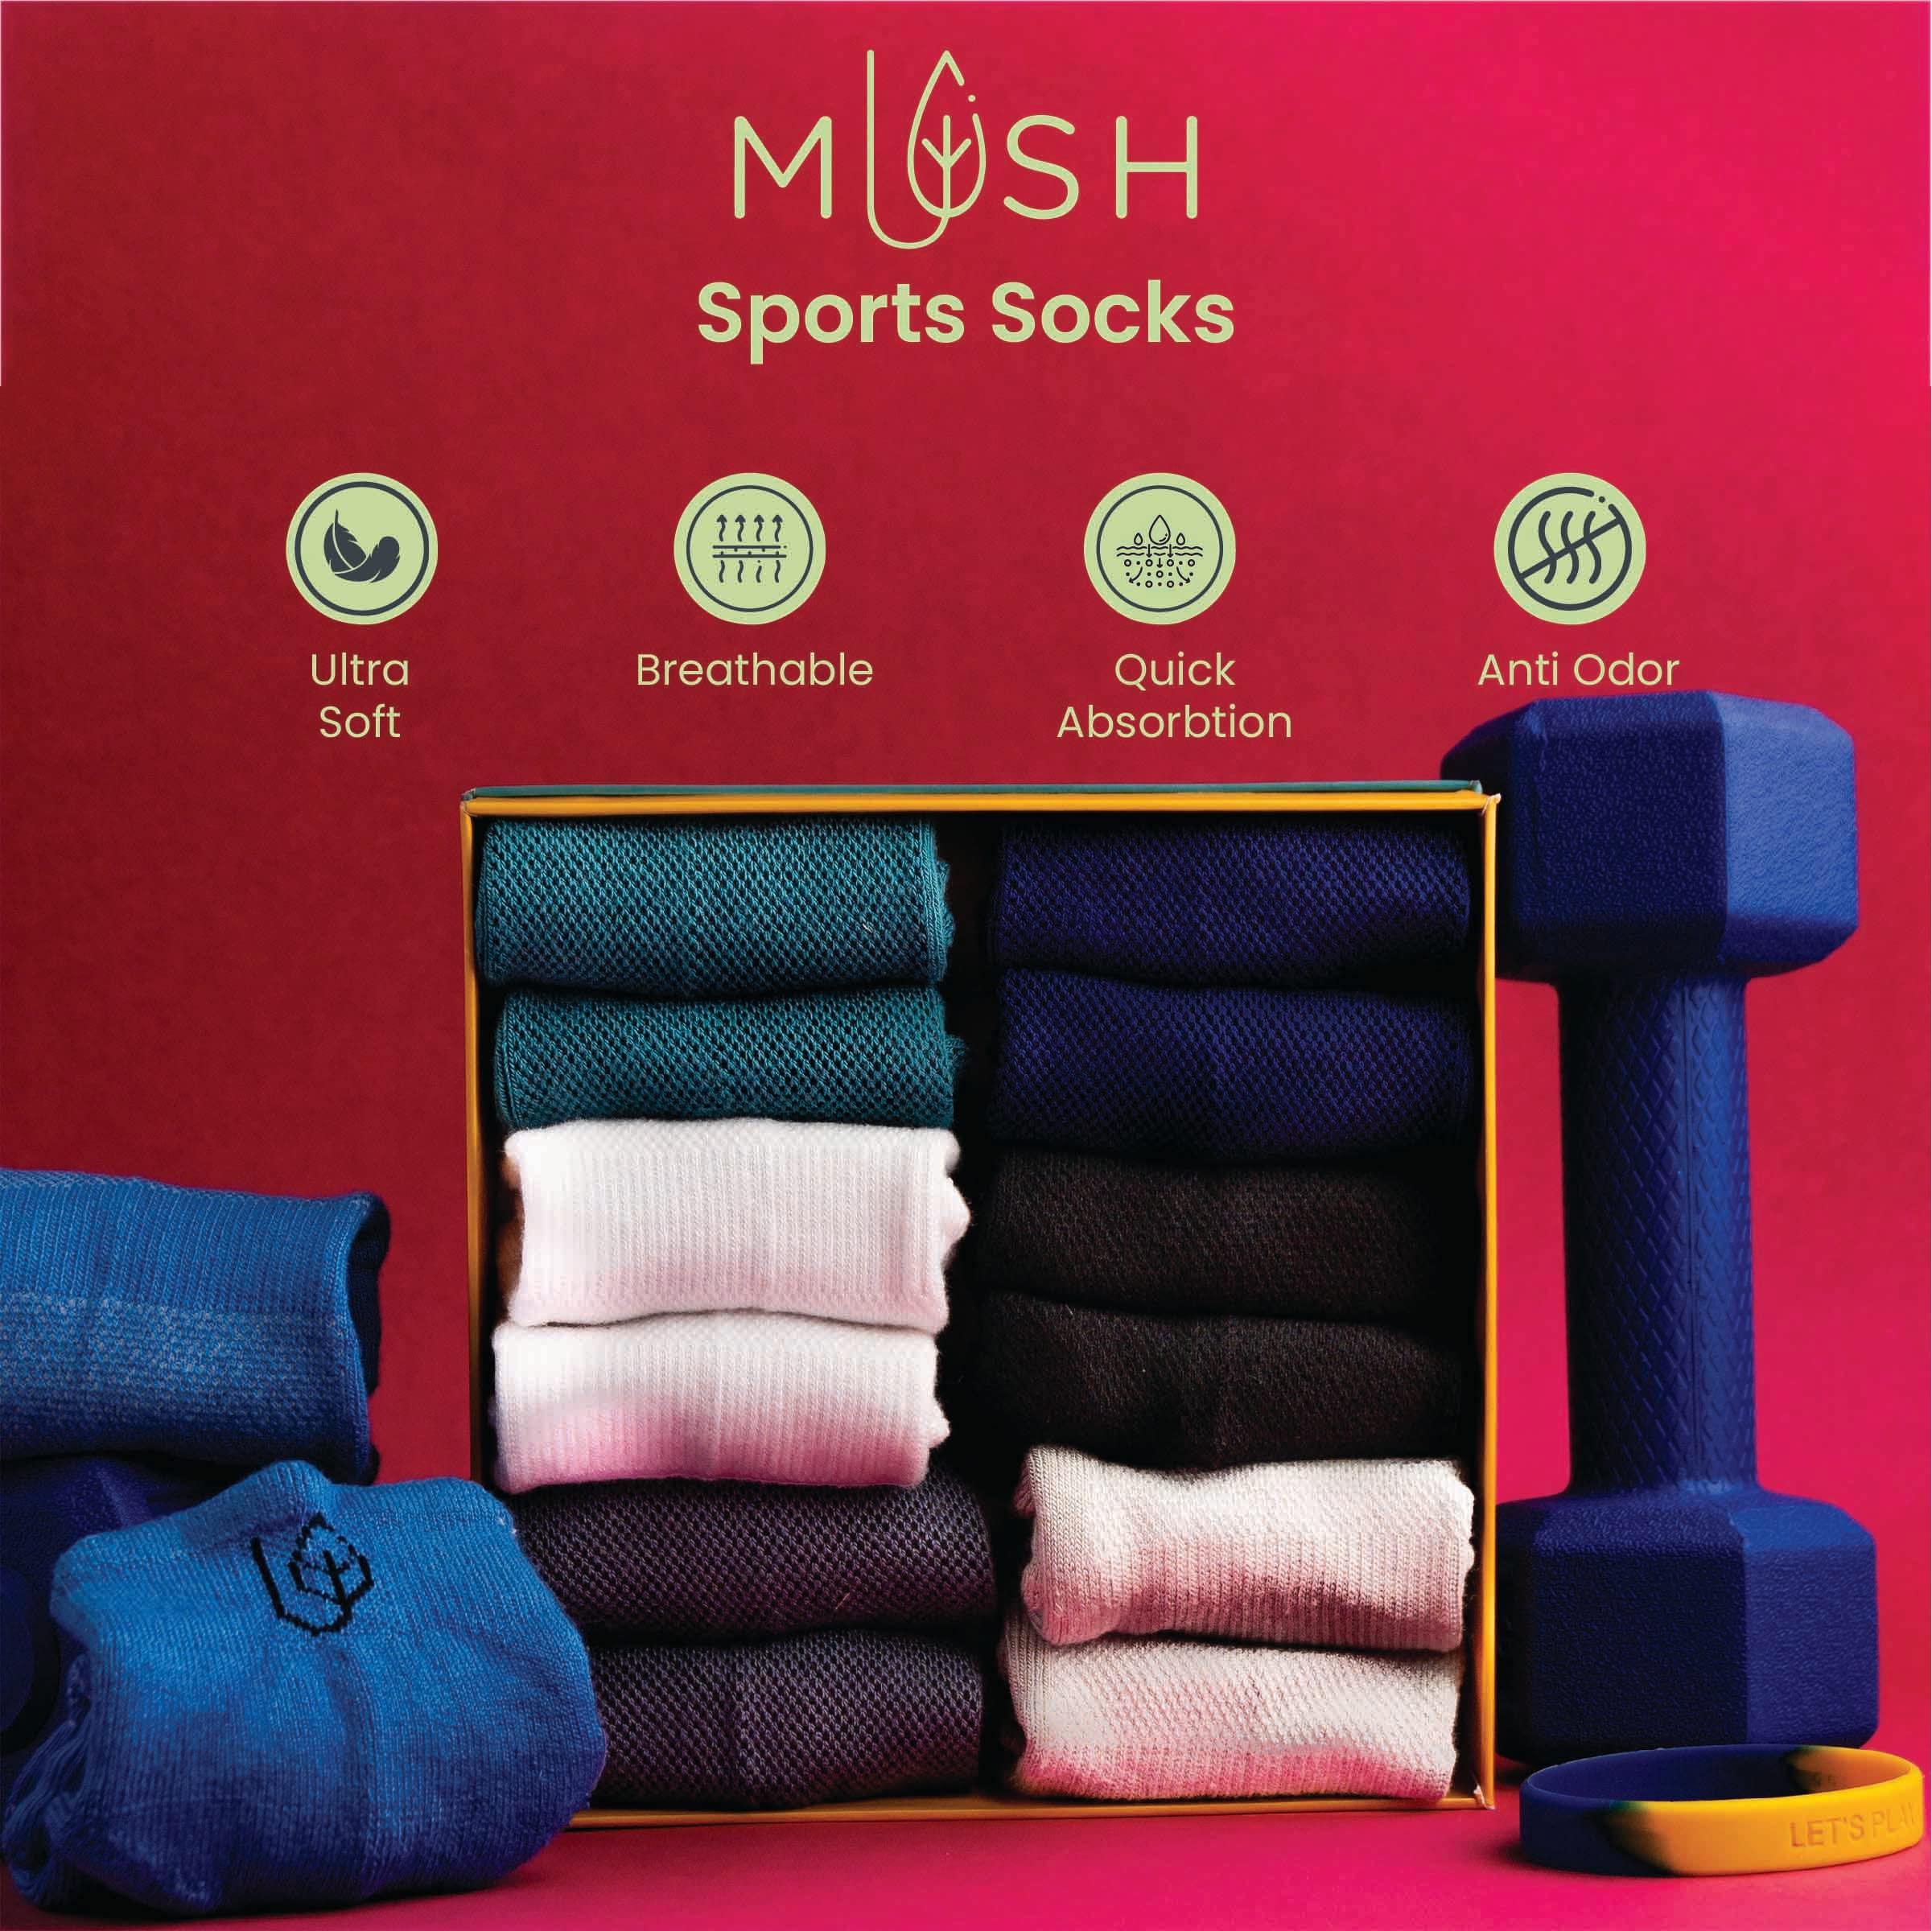 Mush Bamboo Socks for Sports & Casual Wear-Ultra Soft, Anti Odor, Breathable Mesh Design Low Cut Ankle Length (6 Black Navy Dark Grey) UK Size 6-10